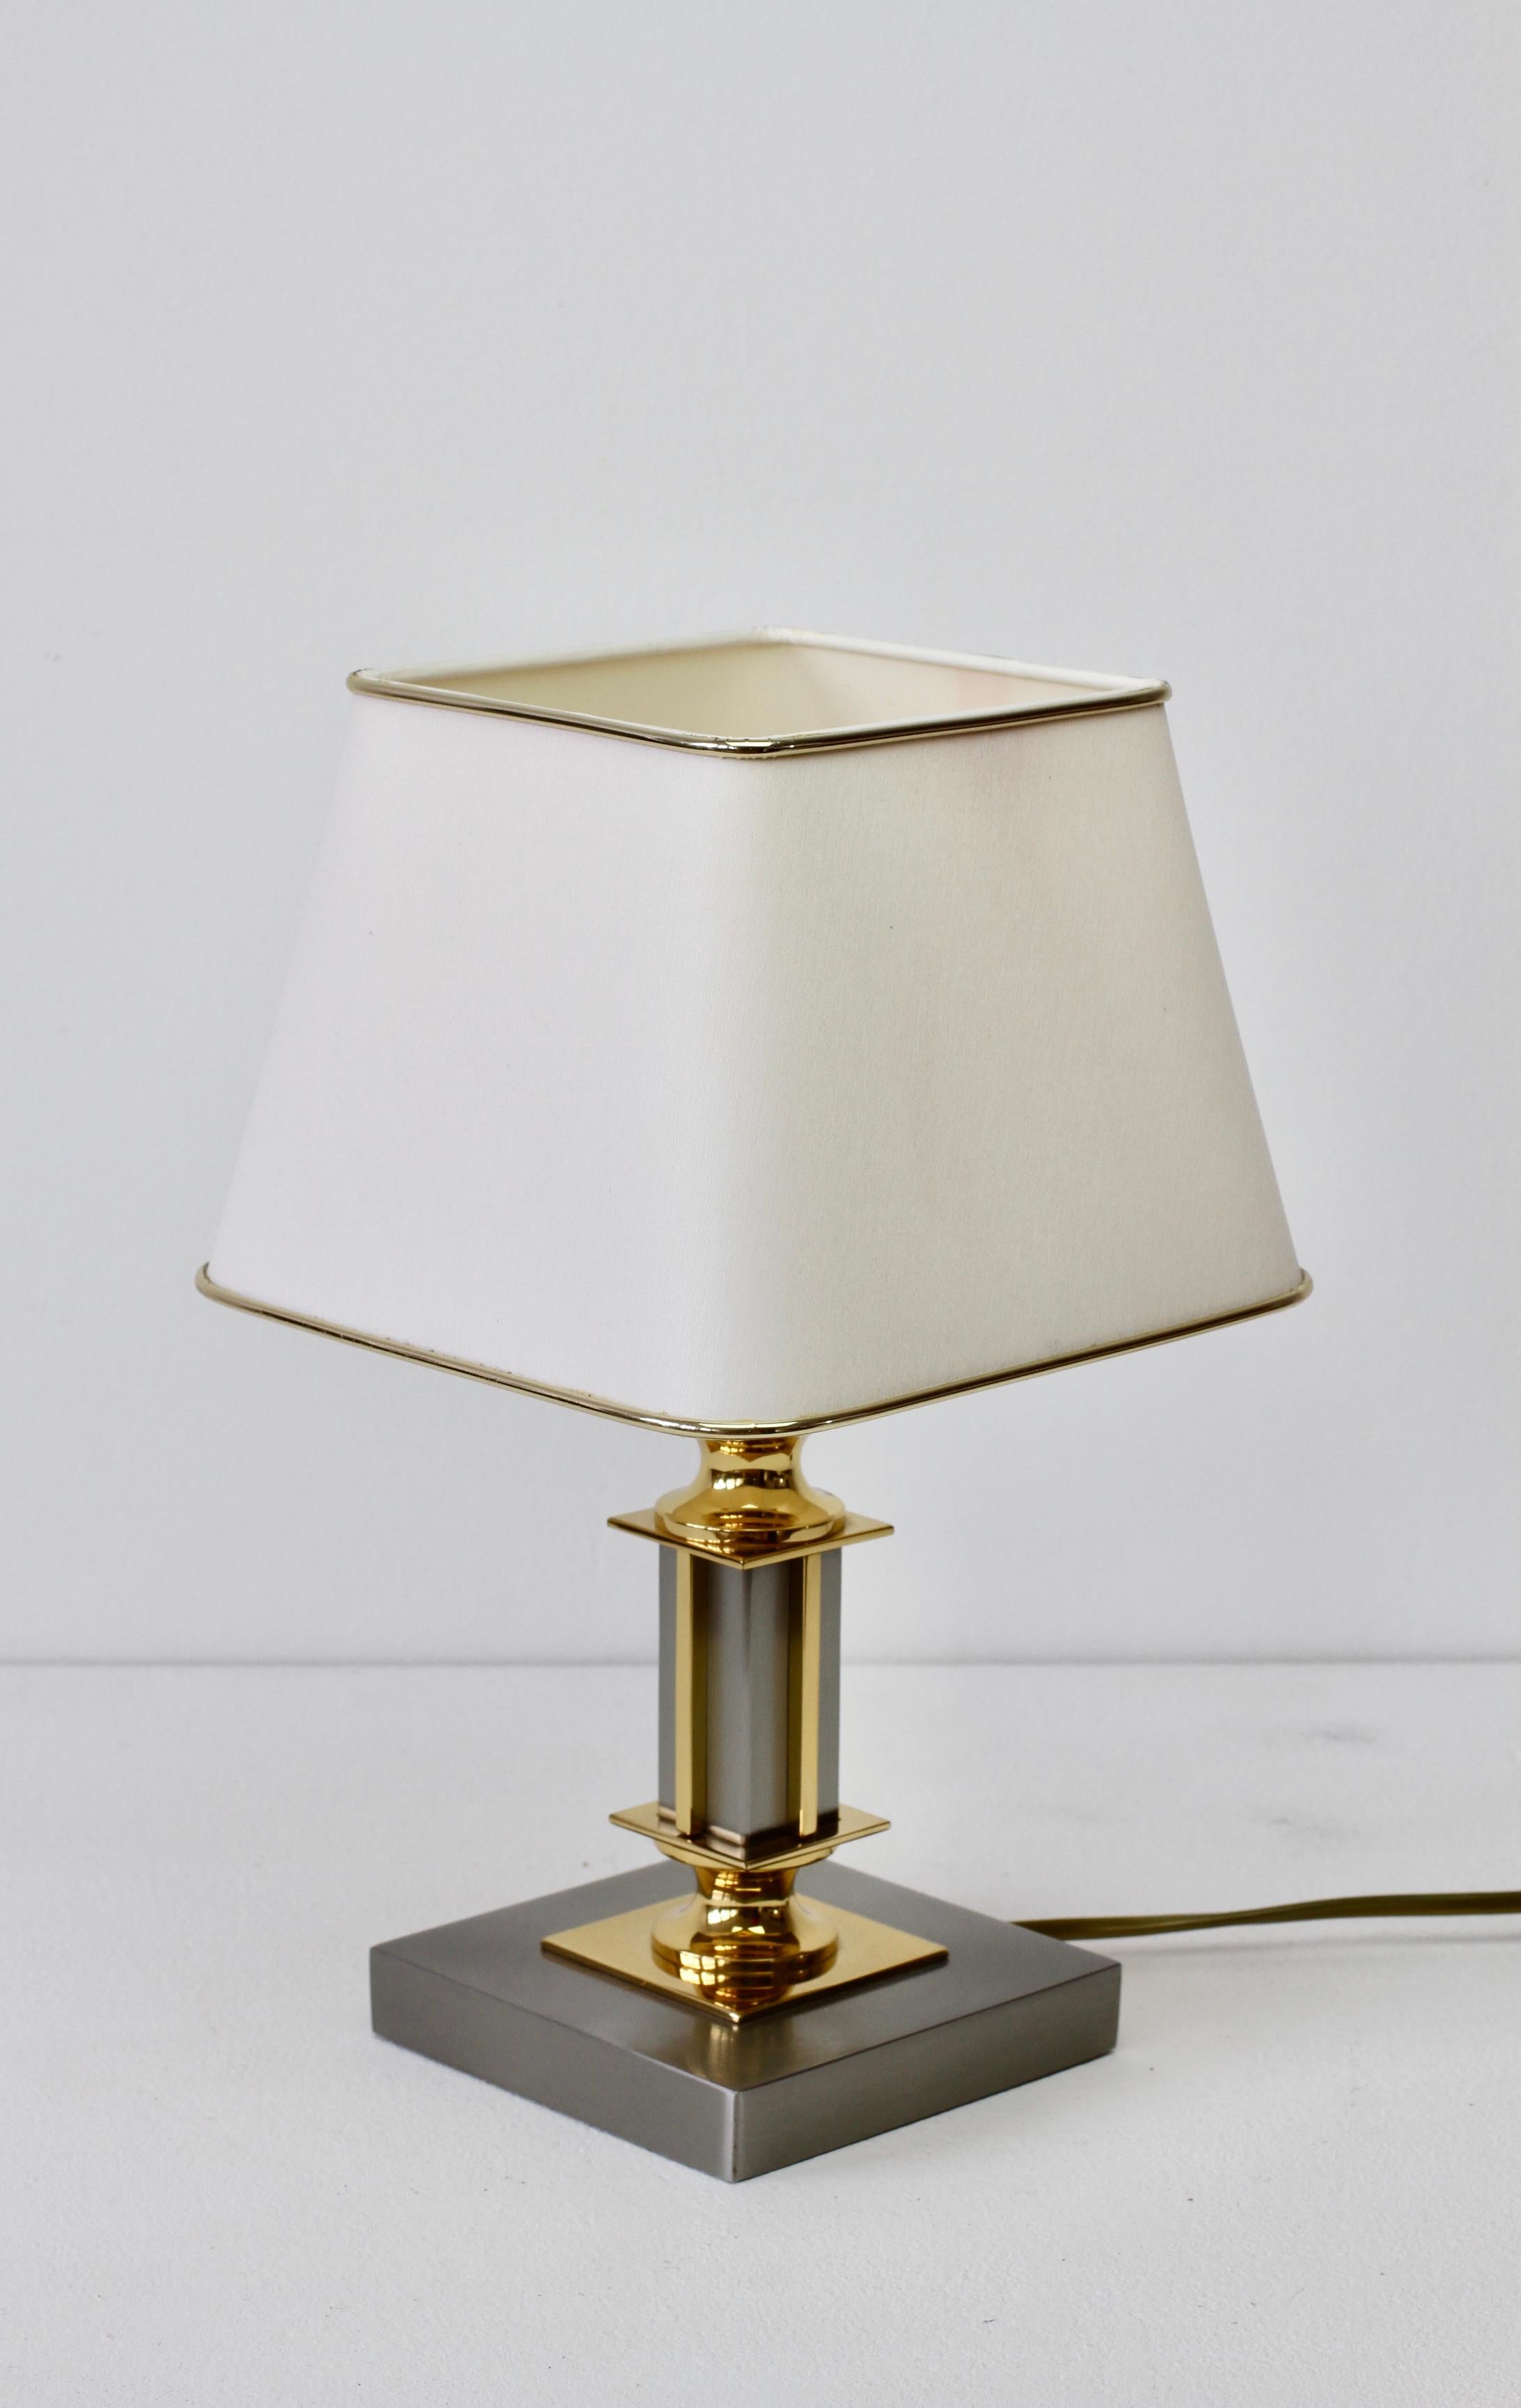 Vintage Brass & Brushed Steel Maison Jansen Style Table Desk Lamp, circa 1980s For Sale 4